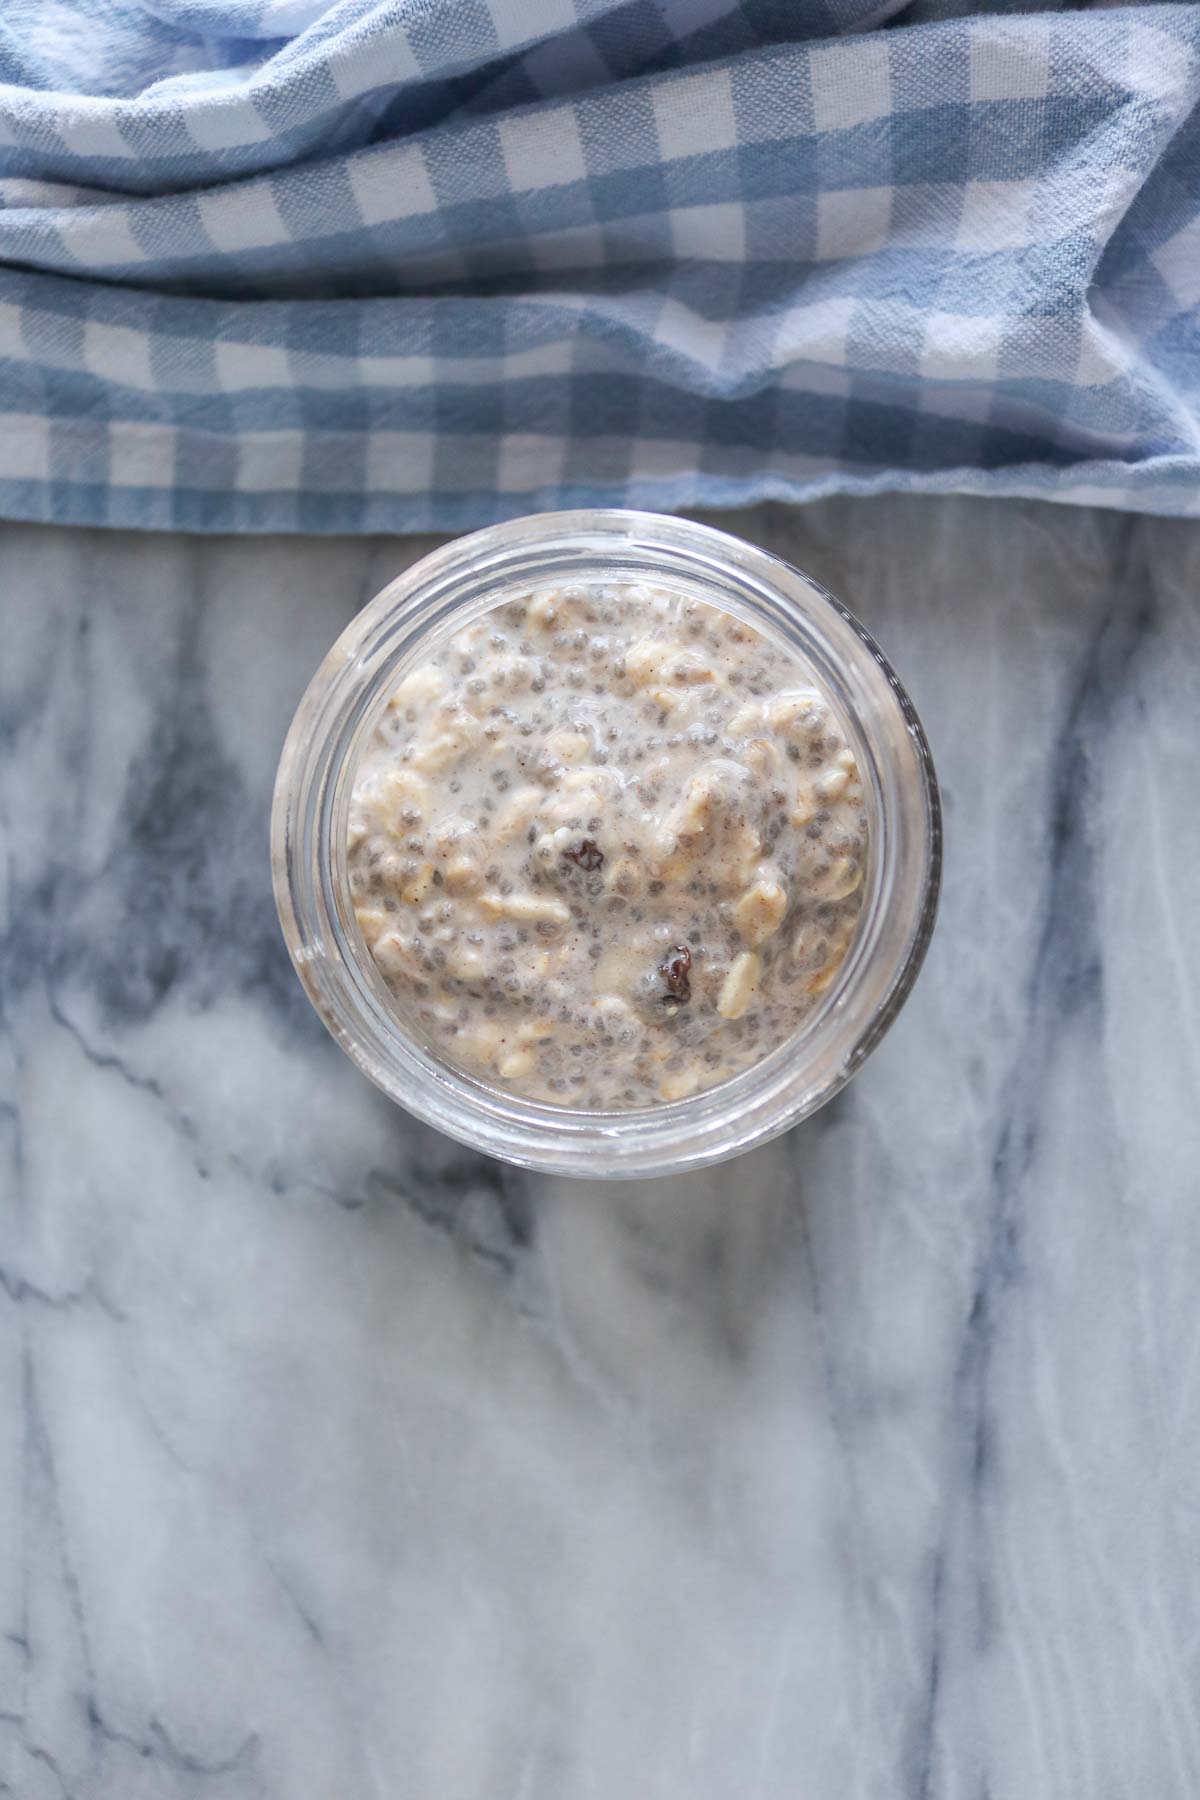 Jar of overnight oats before any toppings are added.